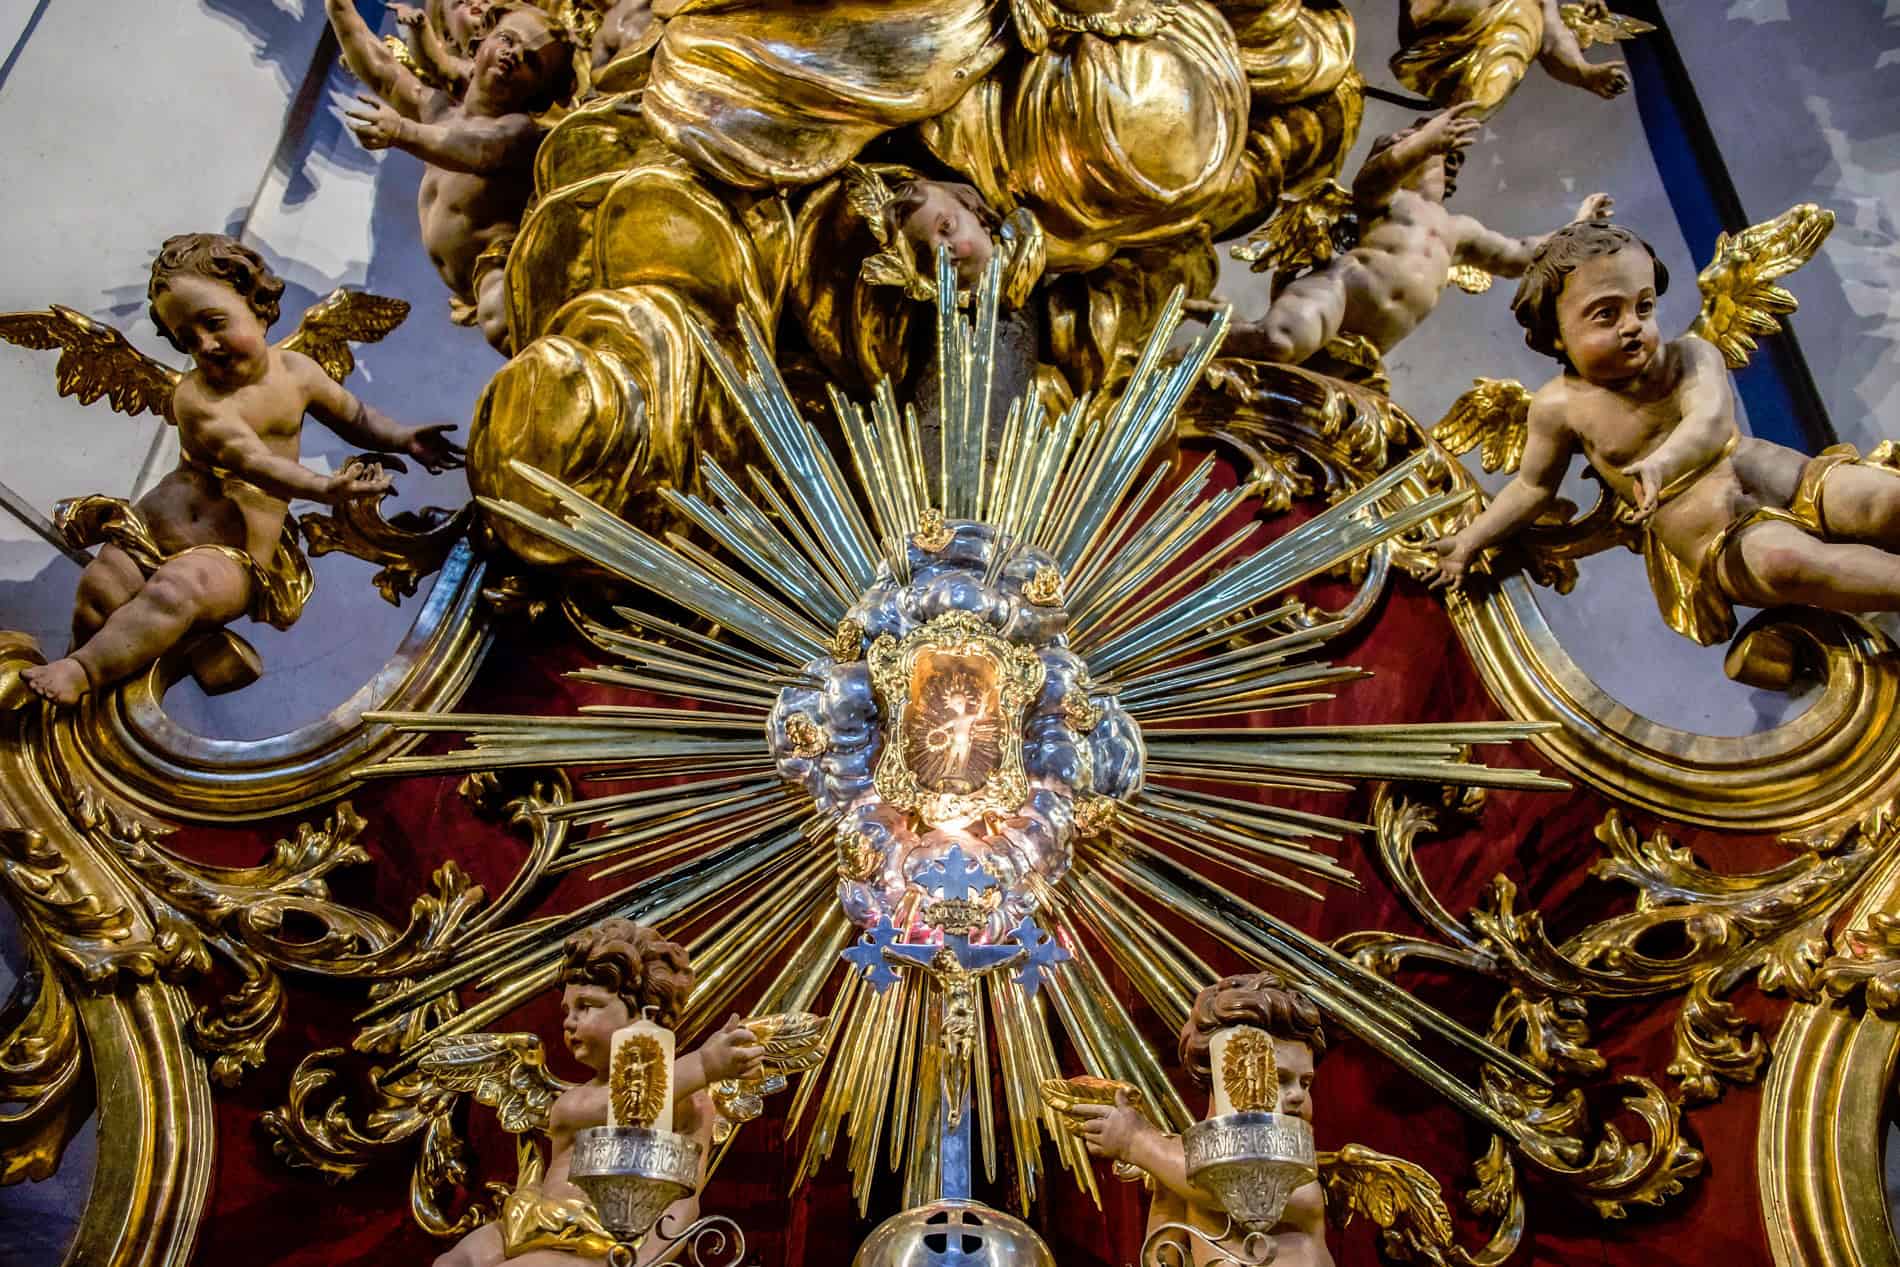 A close up of a Wax Jesus Shrine surrounded by gold decor and cherub sculptures in the famed Christkindl church in Austria. 